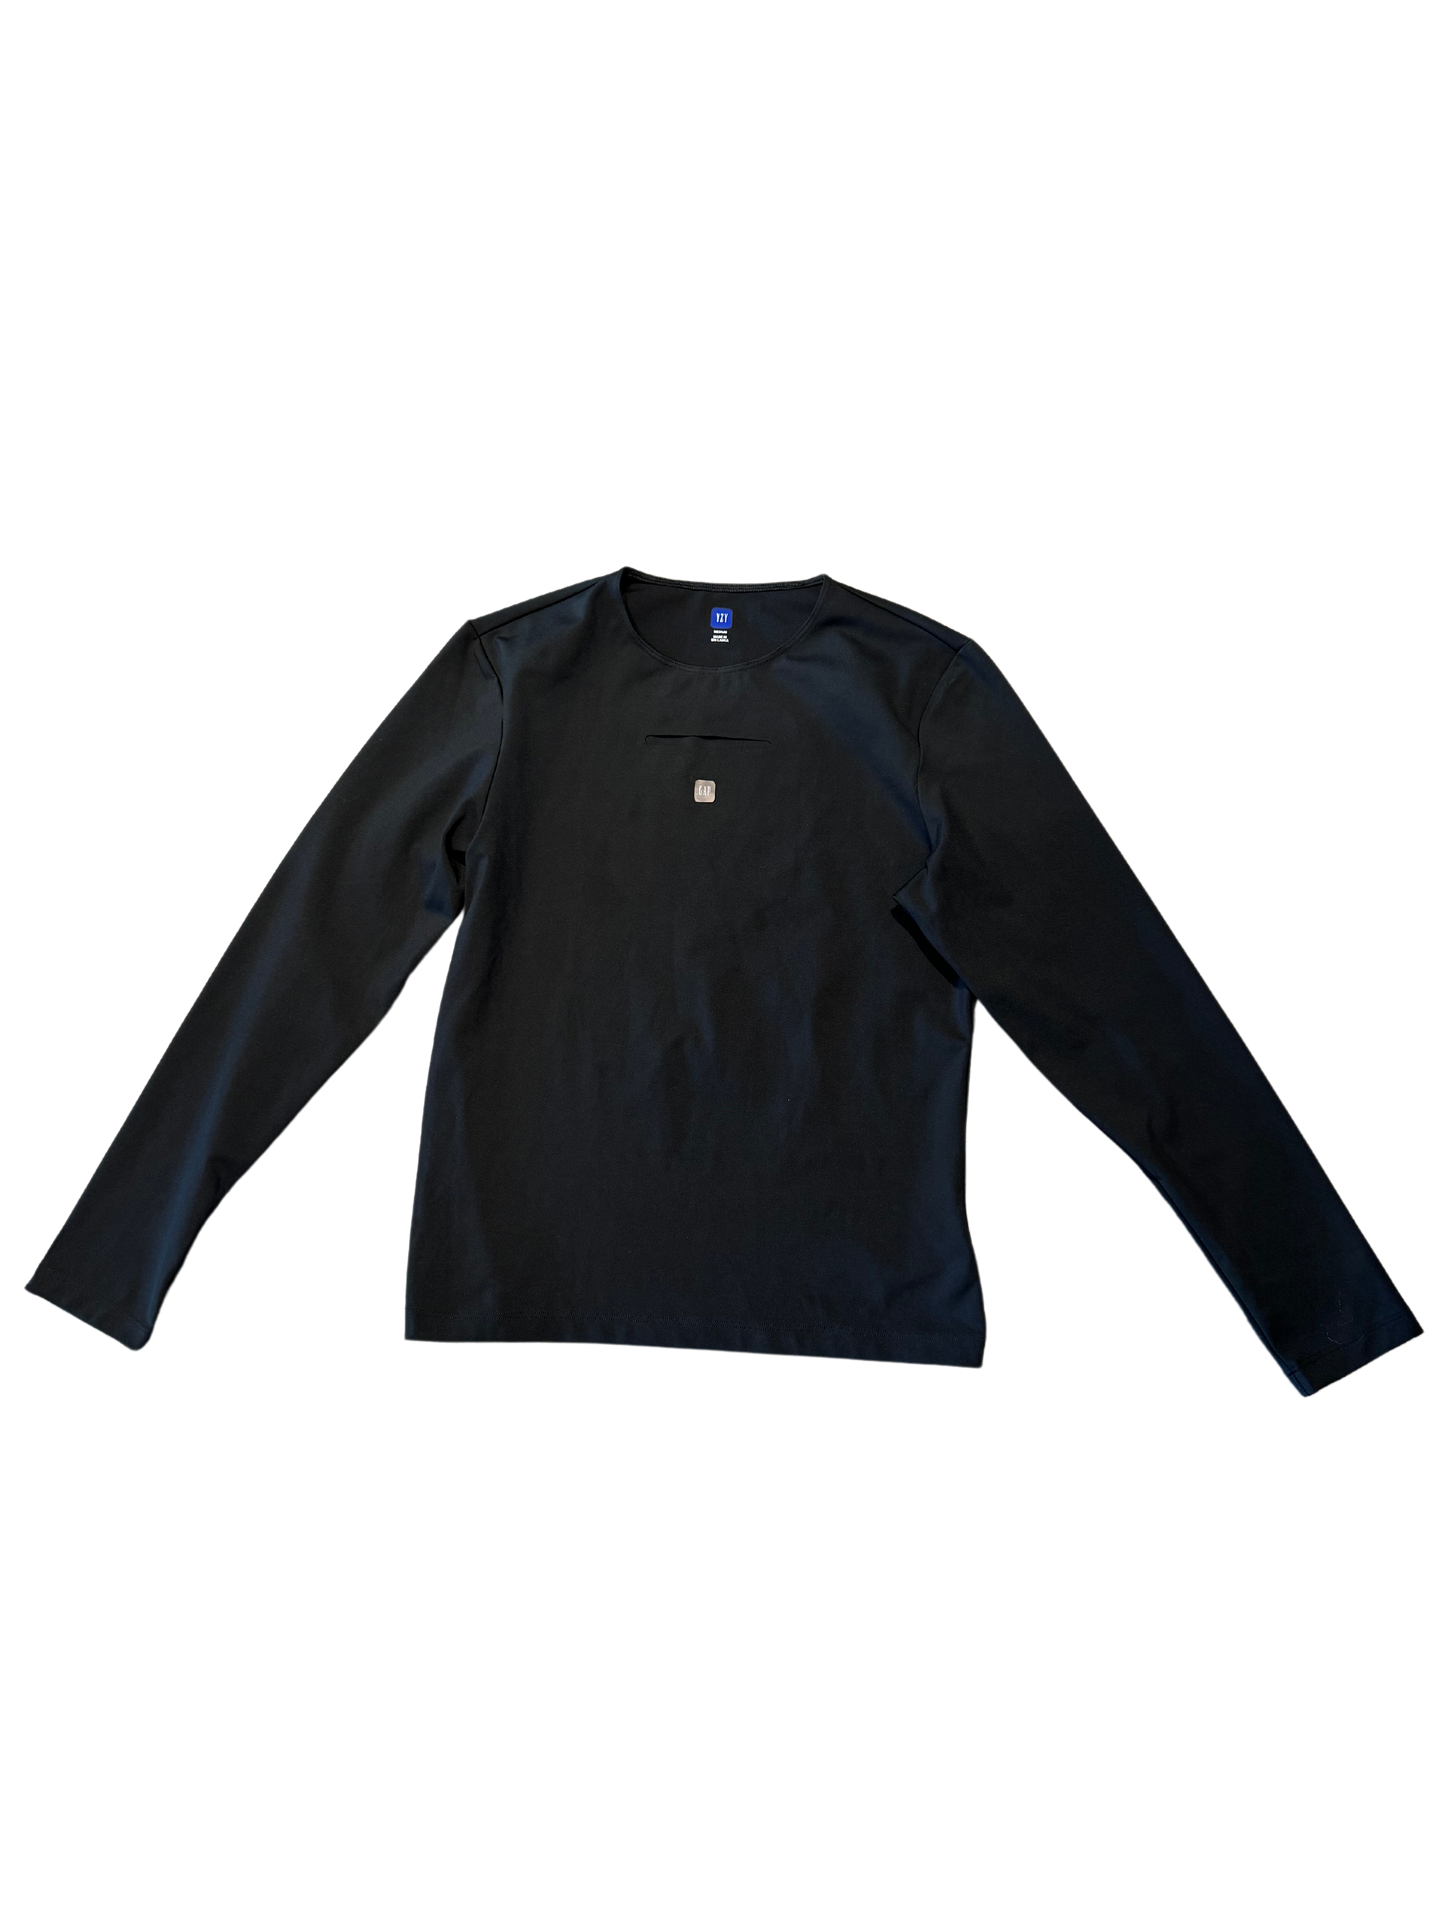 Yeezy Gap L/S Second Skin Black (Preowned)